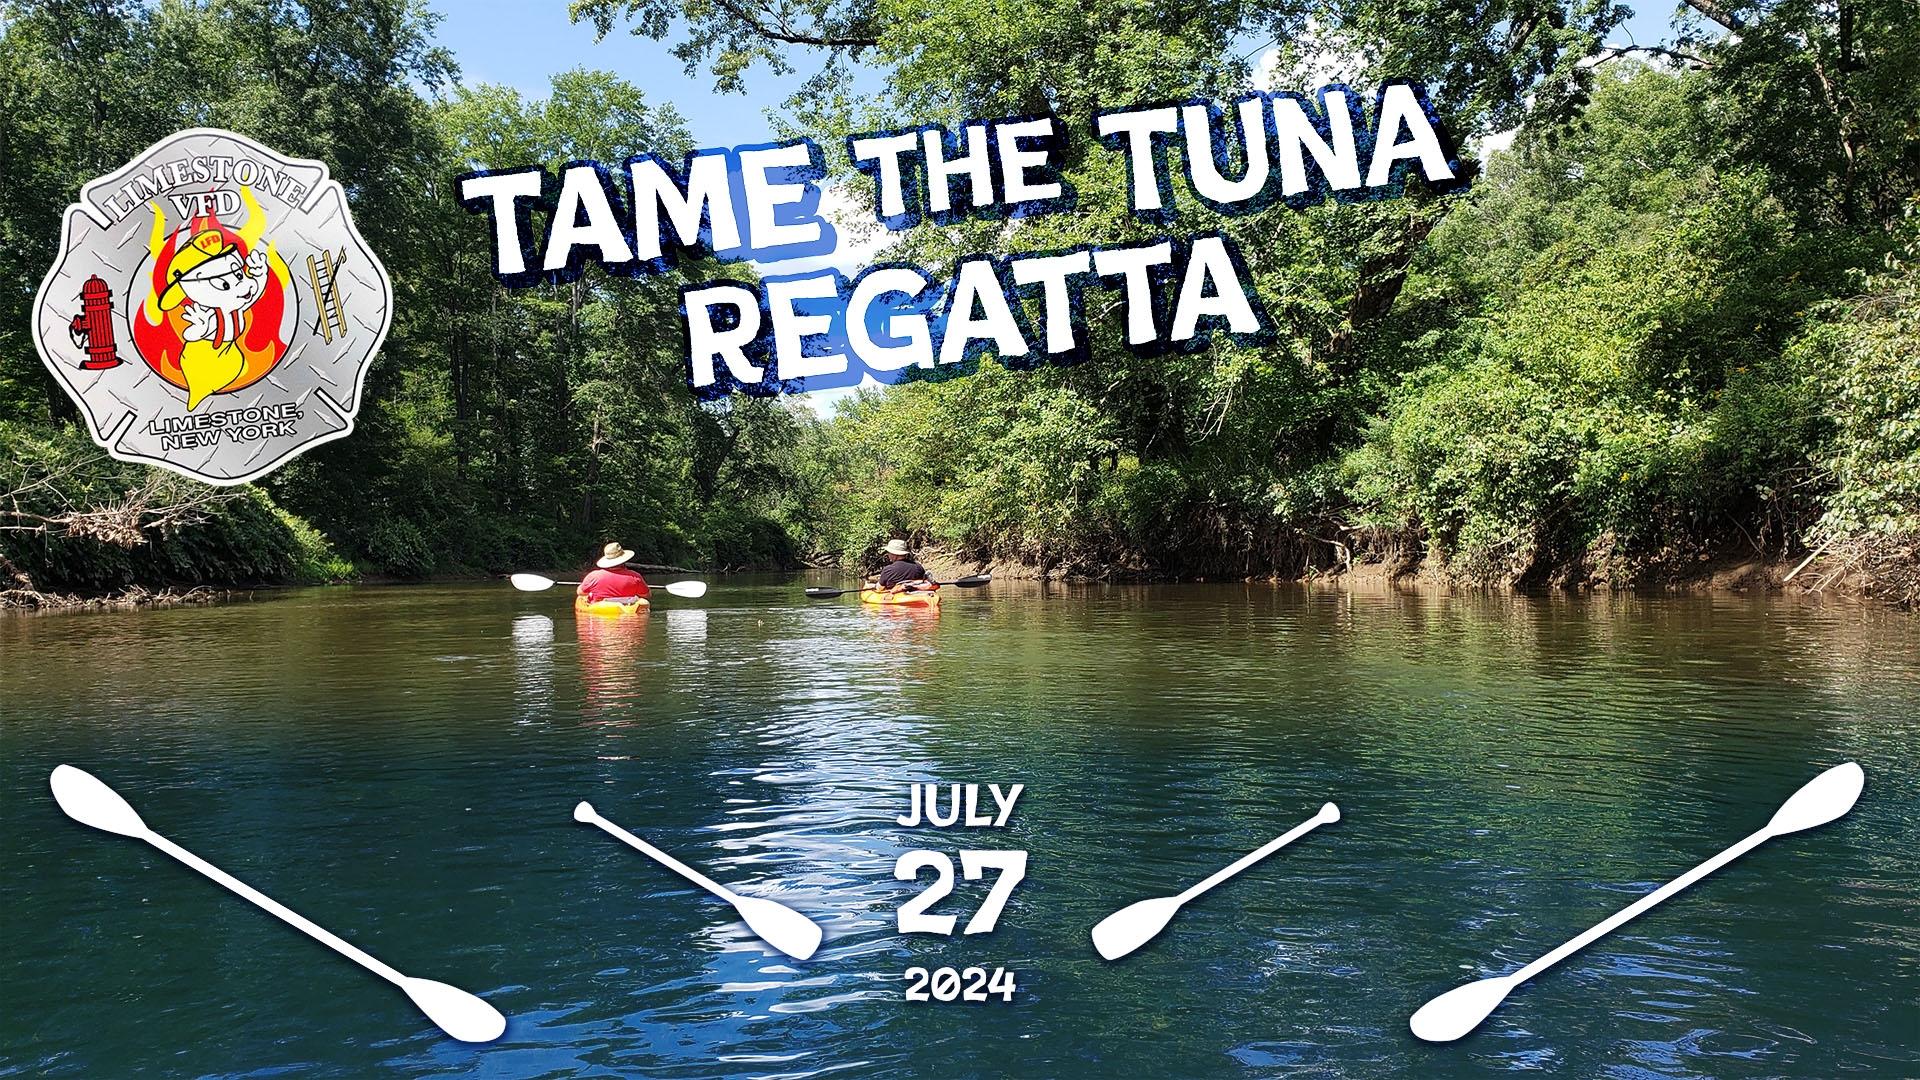 Artwork for Limestone VFD's Tame the Tuna July, 27, 2024 with two people kayaking on the Tunungwant Creek